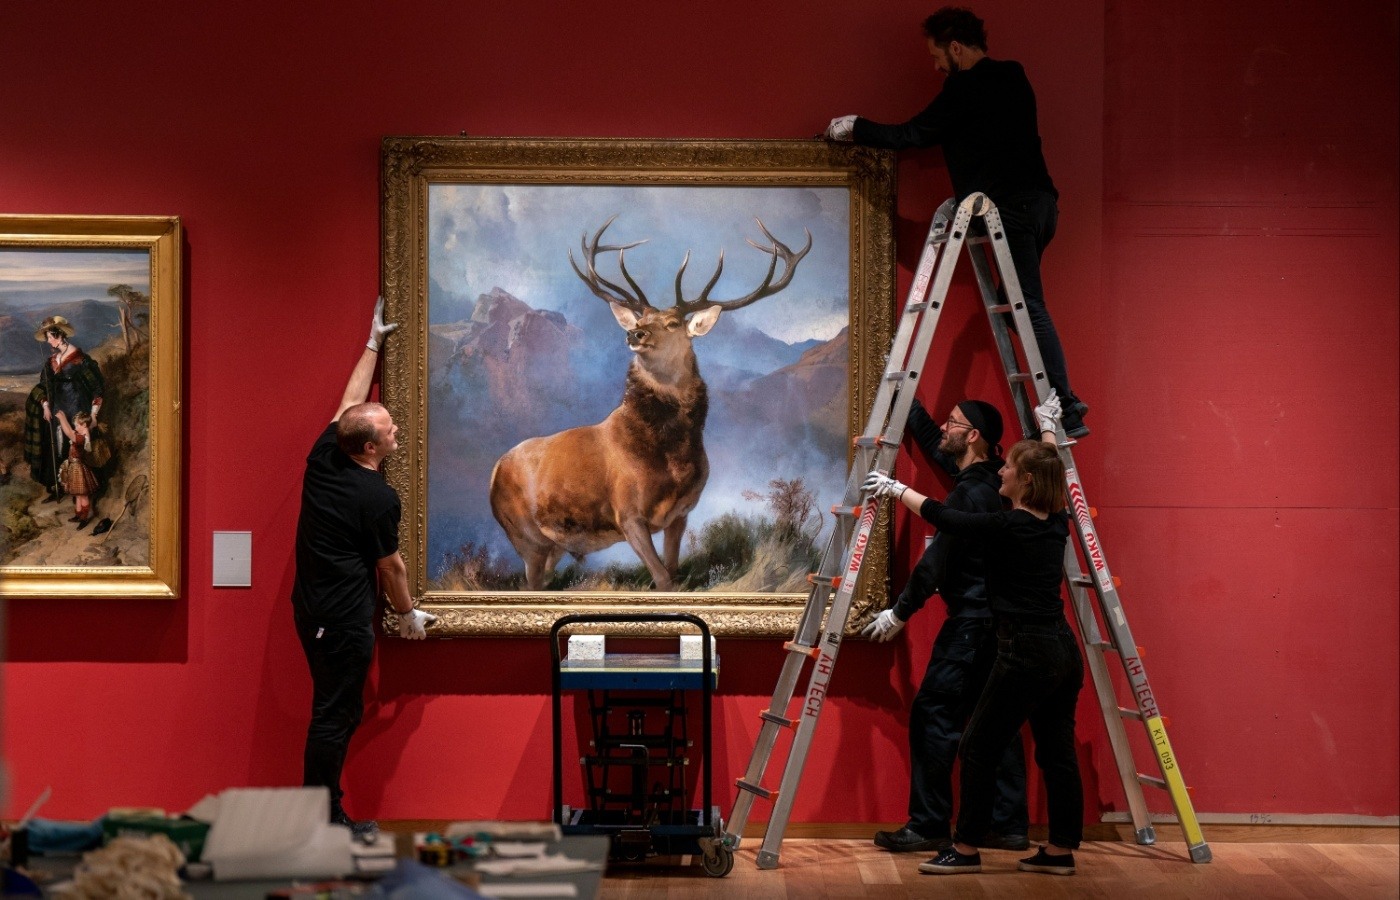 
The Monarch of the Glen
moves to its new home at the new Scottish galleries at the
National.